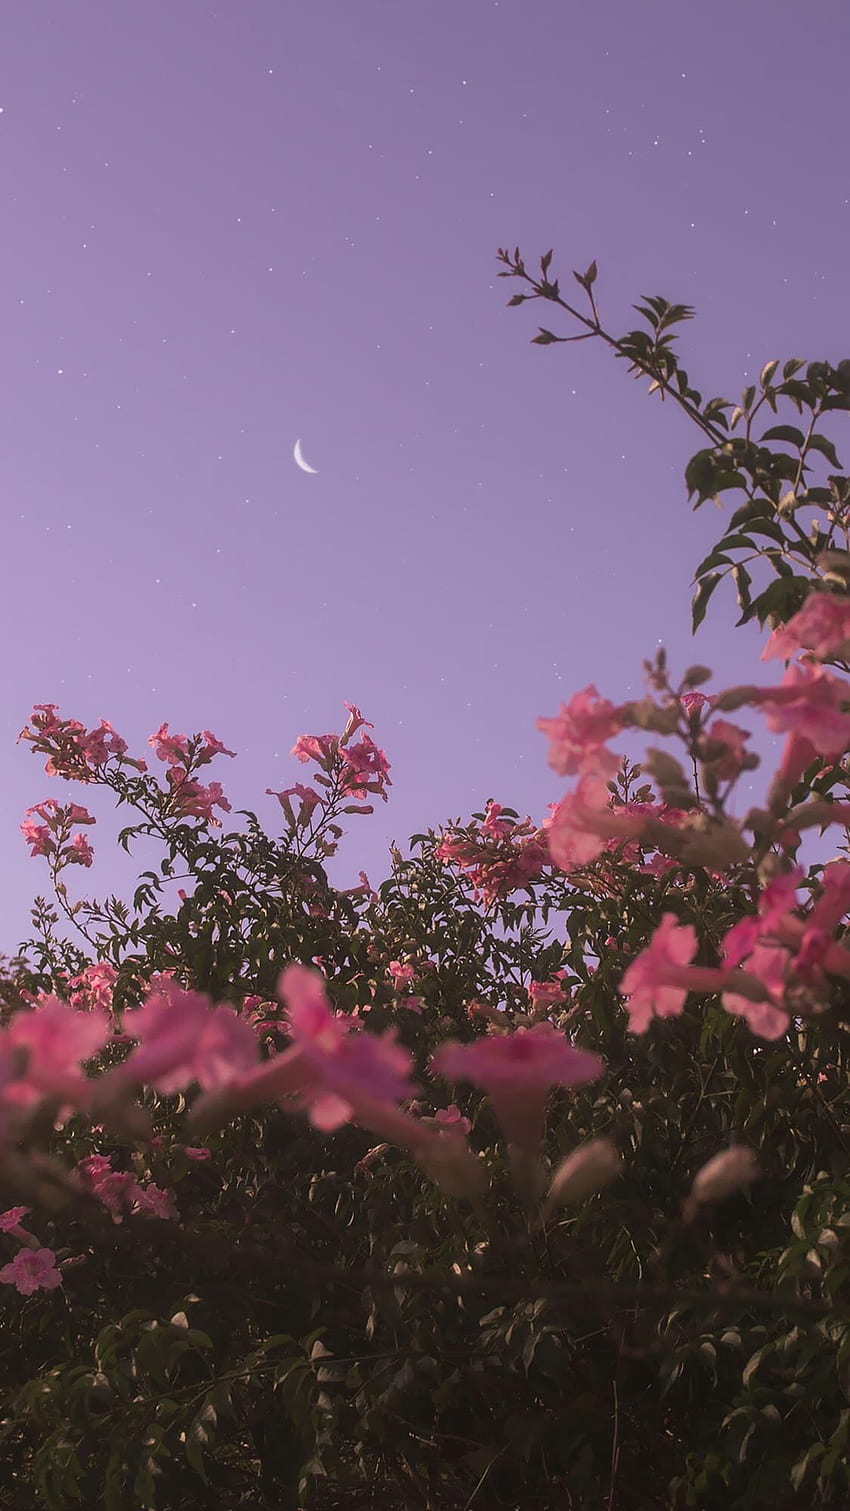 The sky just begun to darken, and the flowers were in full bloom, Aesthetic Flowers HD phone wallpaper